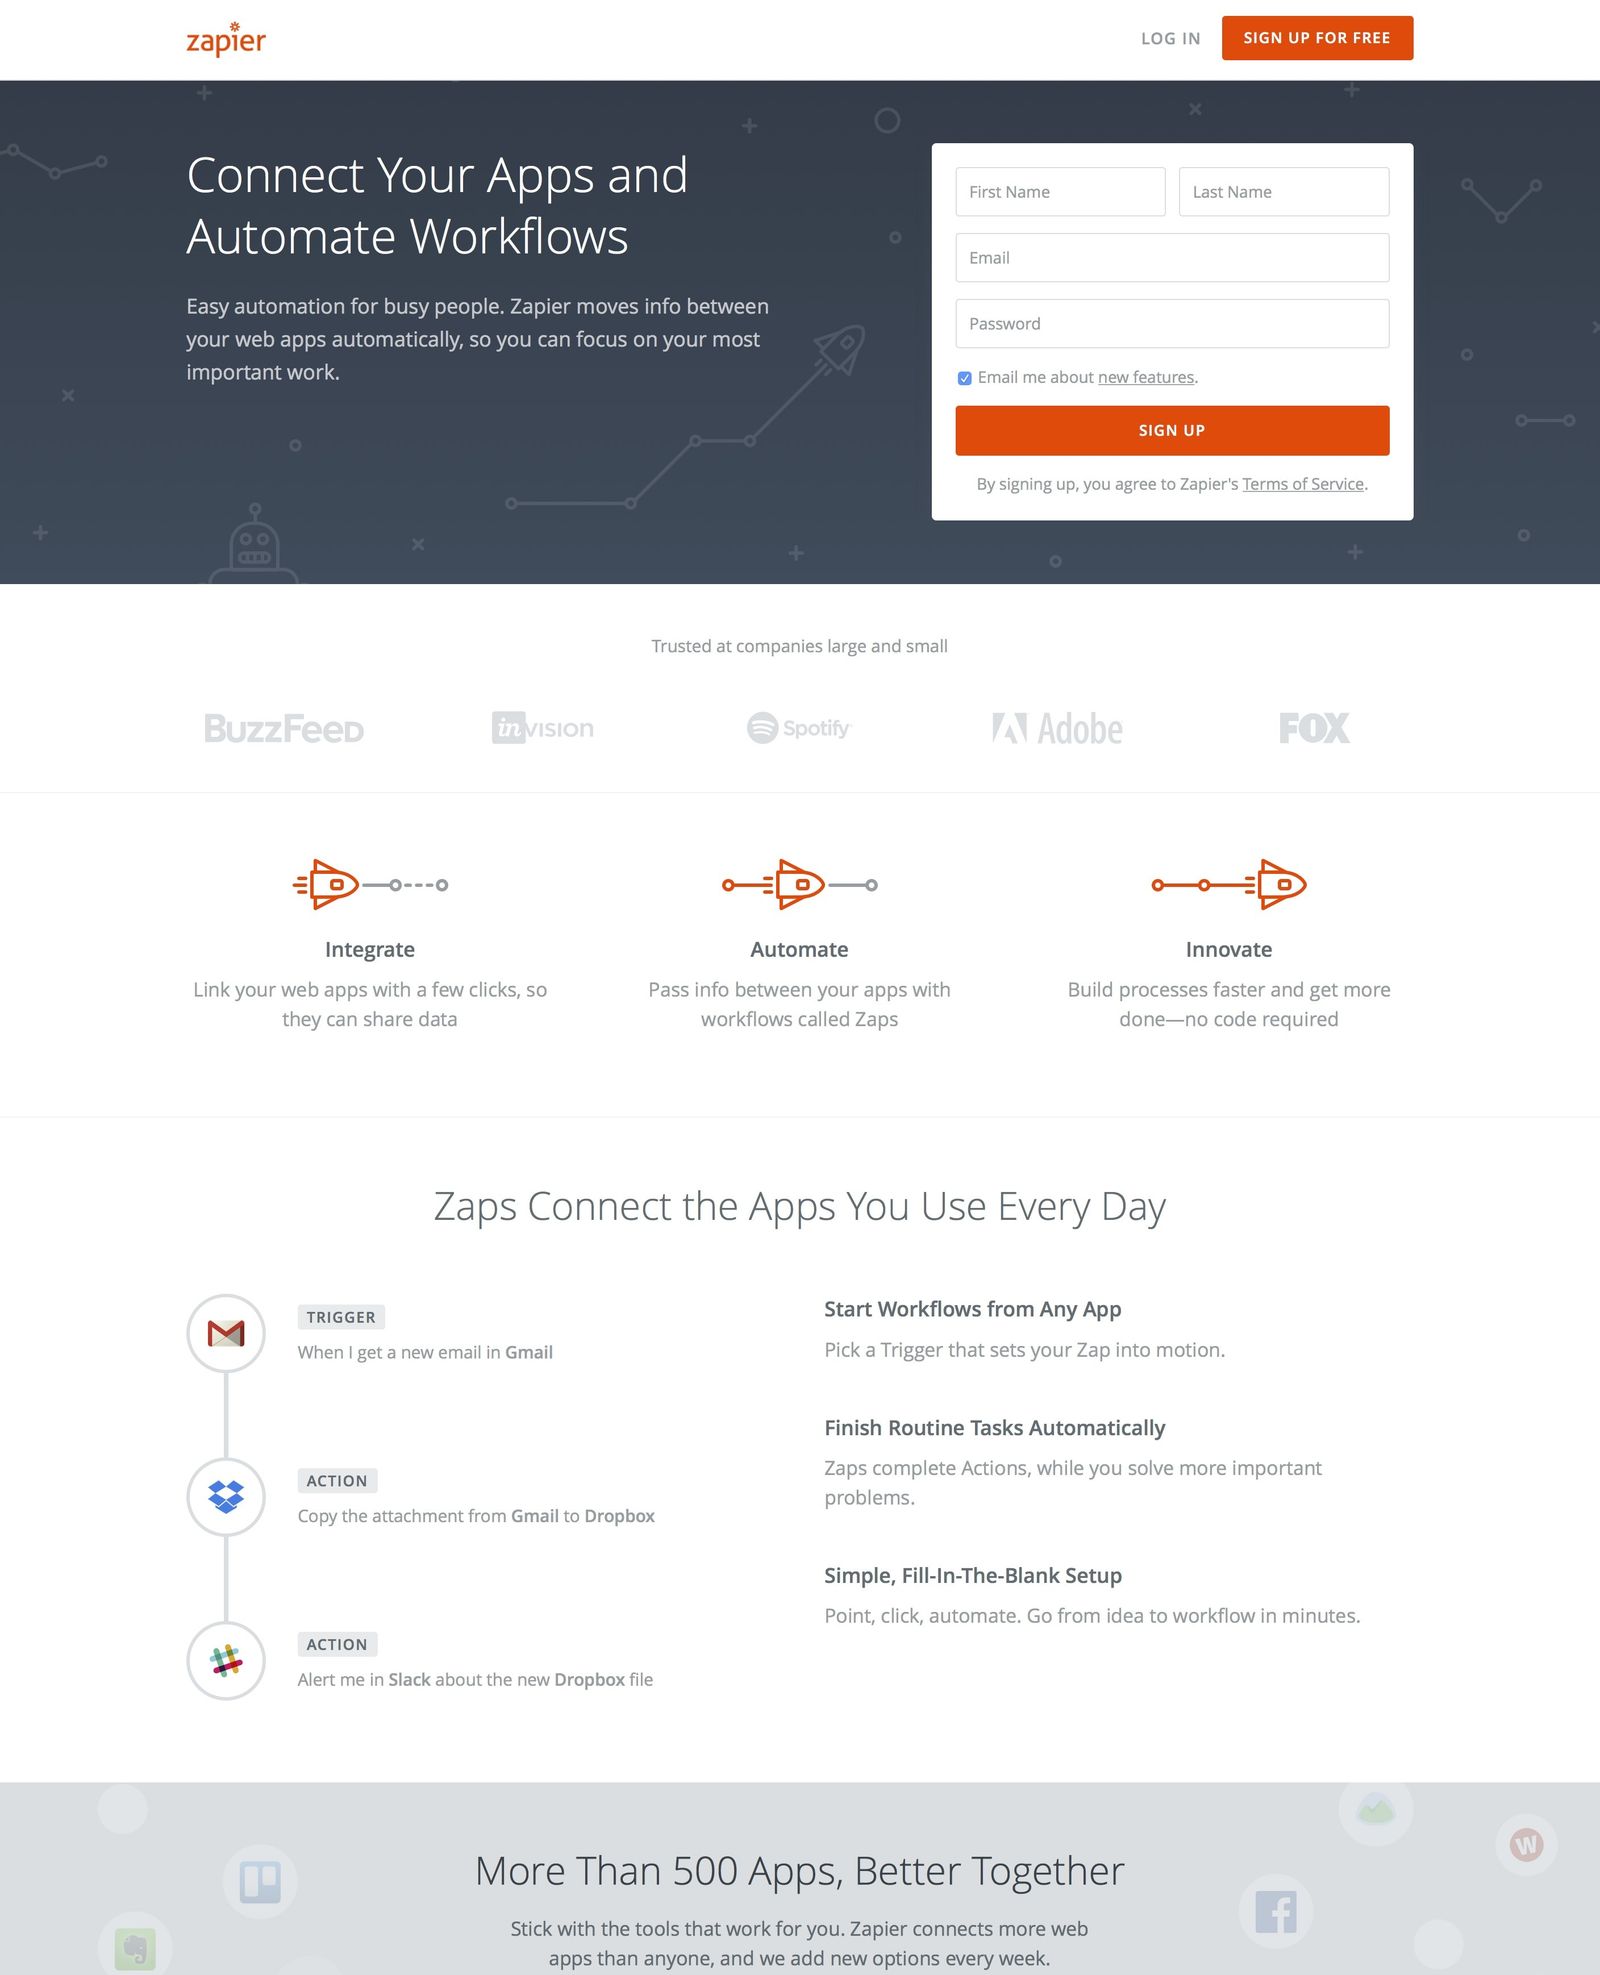 /articles/landing-page-inspiration/landing-page-design-example-5.jpg)_Saas Landing page example from Zapier